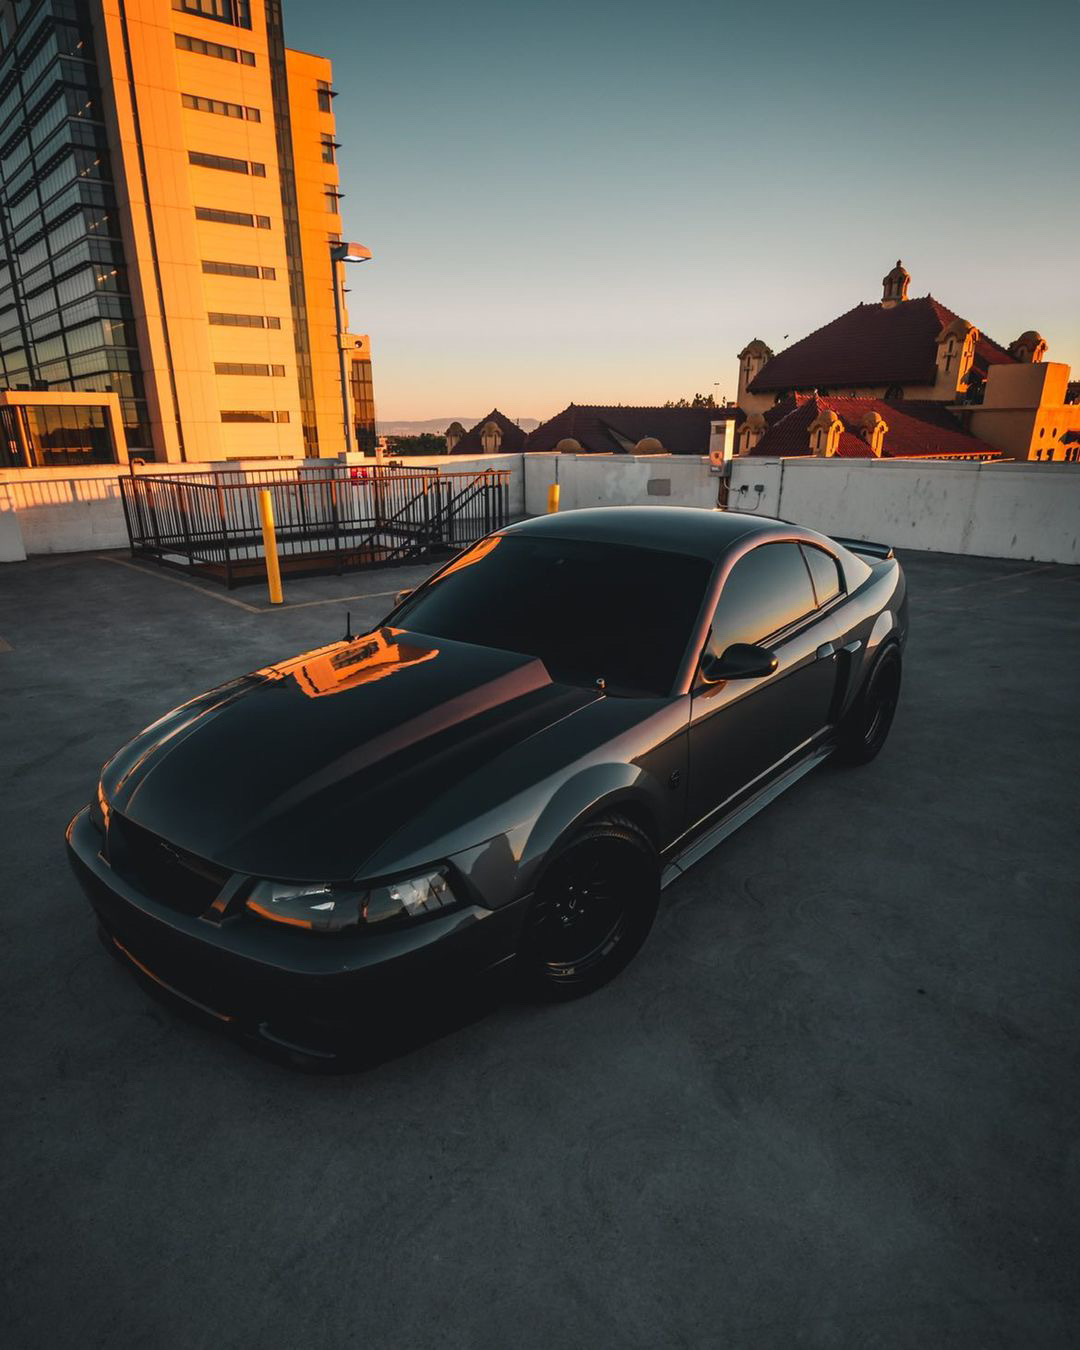 Blacked out Ford Mustang Mach 1 new Edge with a cowl hood